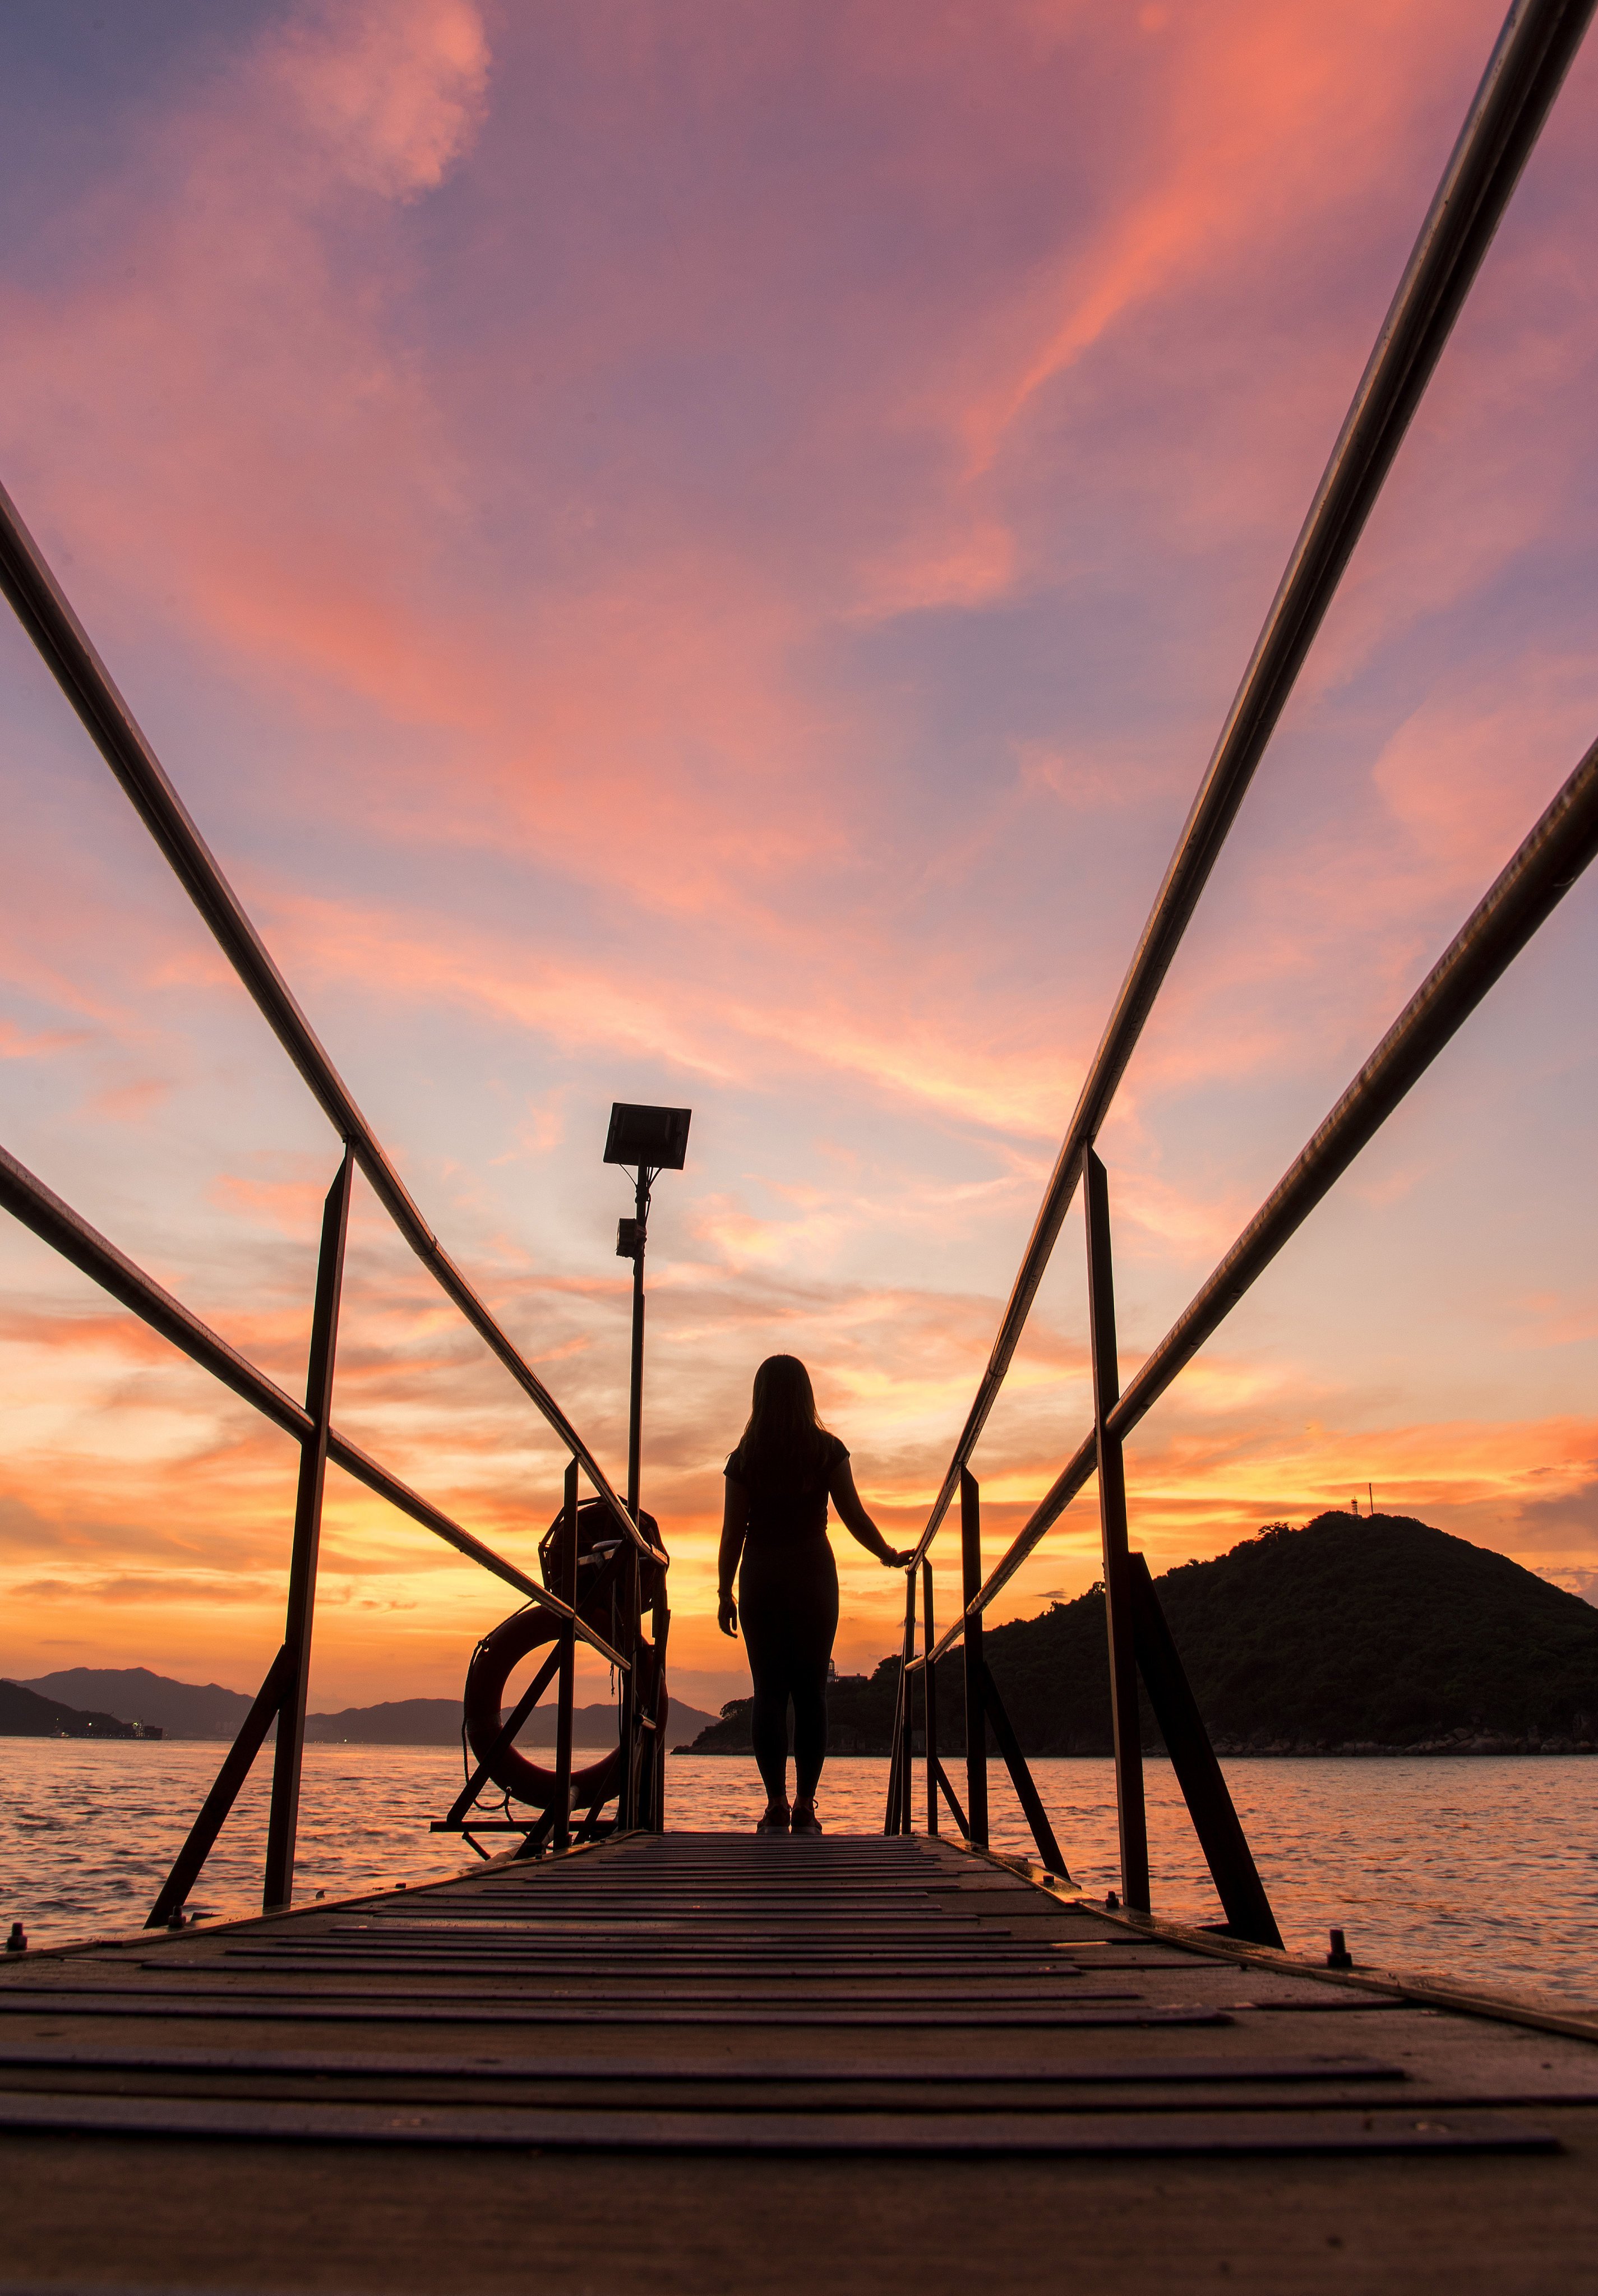 Sai Wan Swimming Shed is just one of the places to experience a beautiful sunset in Hong Kong. Photo: Tim Pile